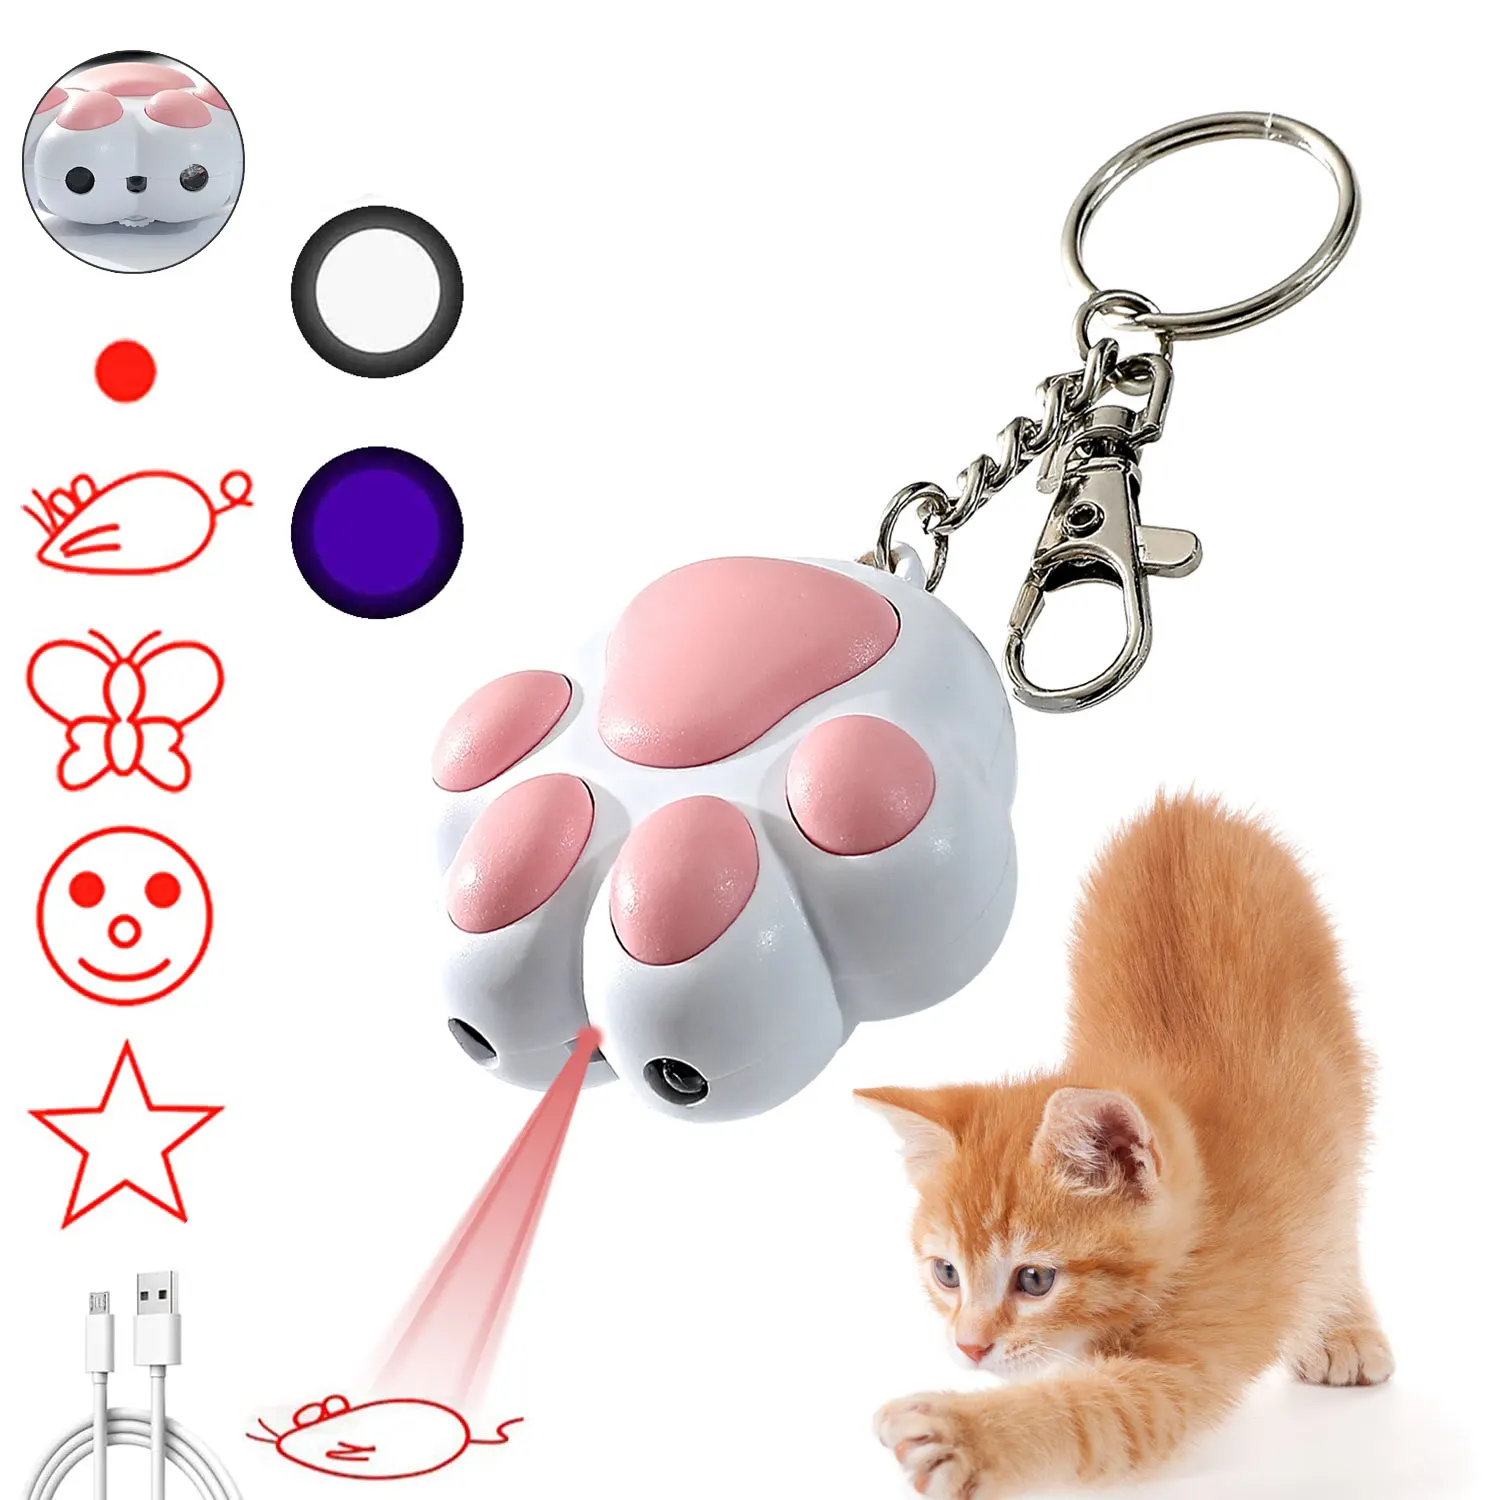 

Electronic Pet Laser Pointer Cat toys Multifunctional USB Charging Pen Pointer Toy Cat Interactive Funny Indoor Cat Teaser Toys